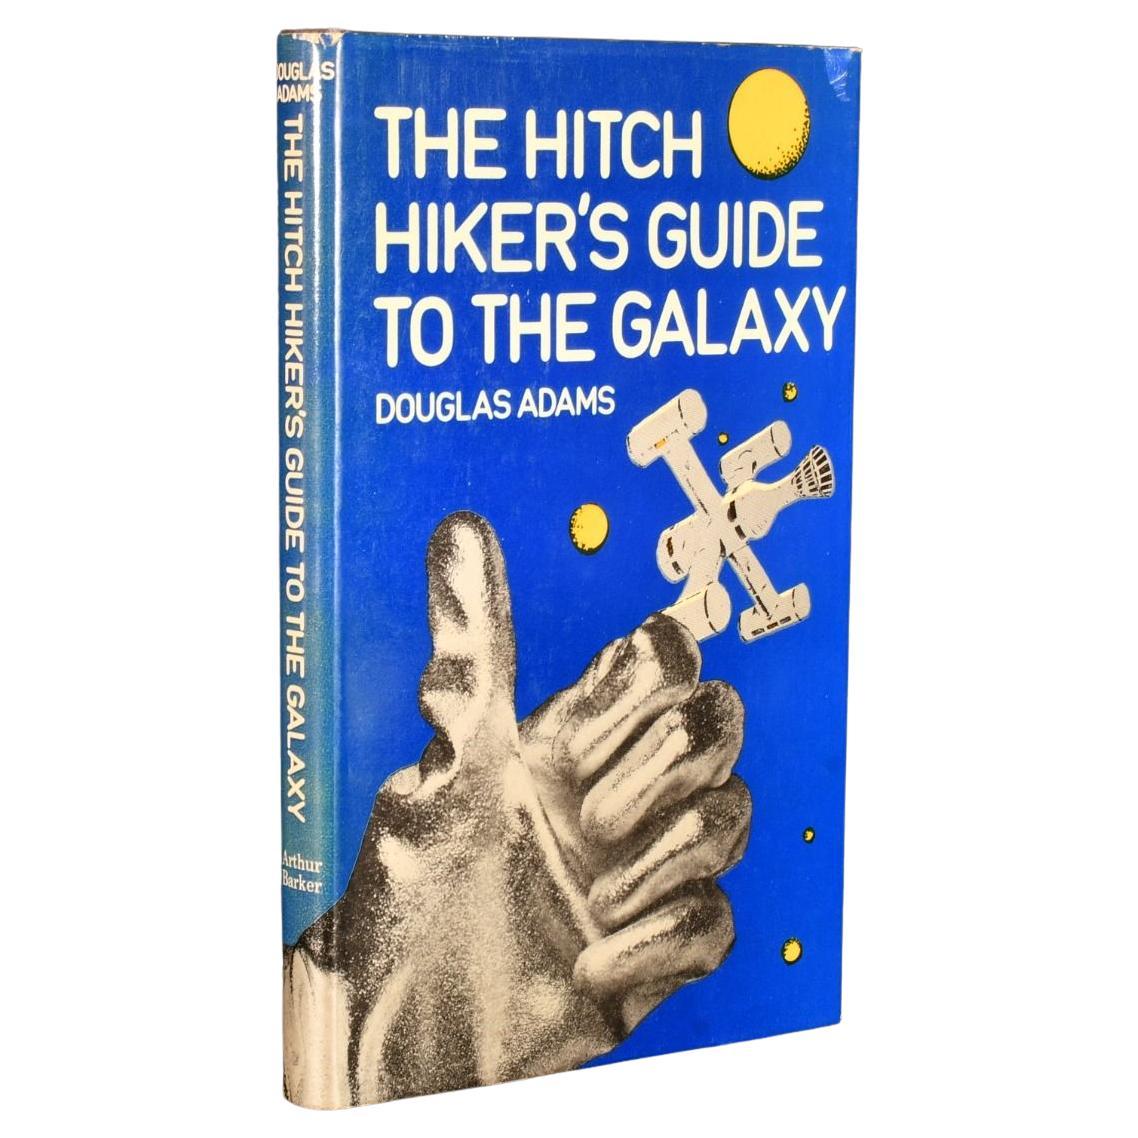 1979 The Hitch Hiker's Guide to the Galaxy For Sale